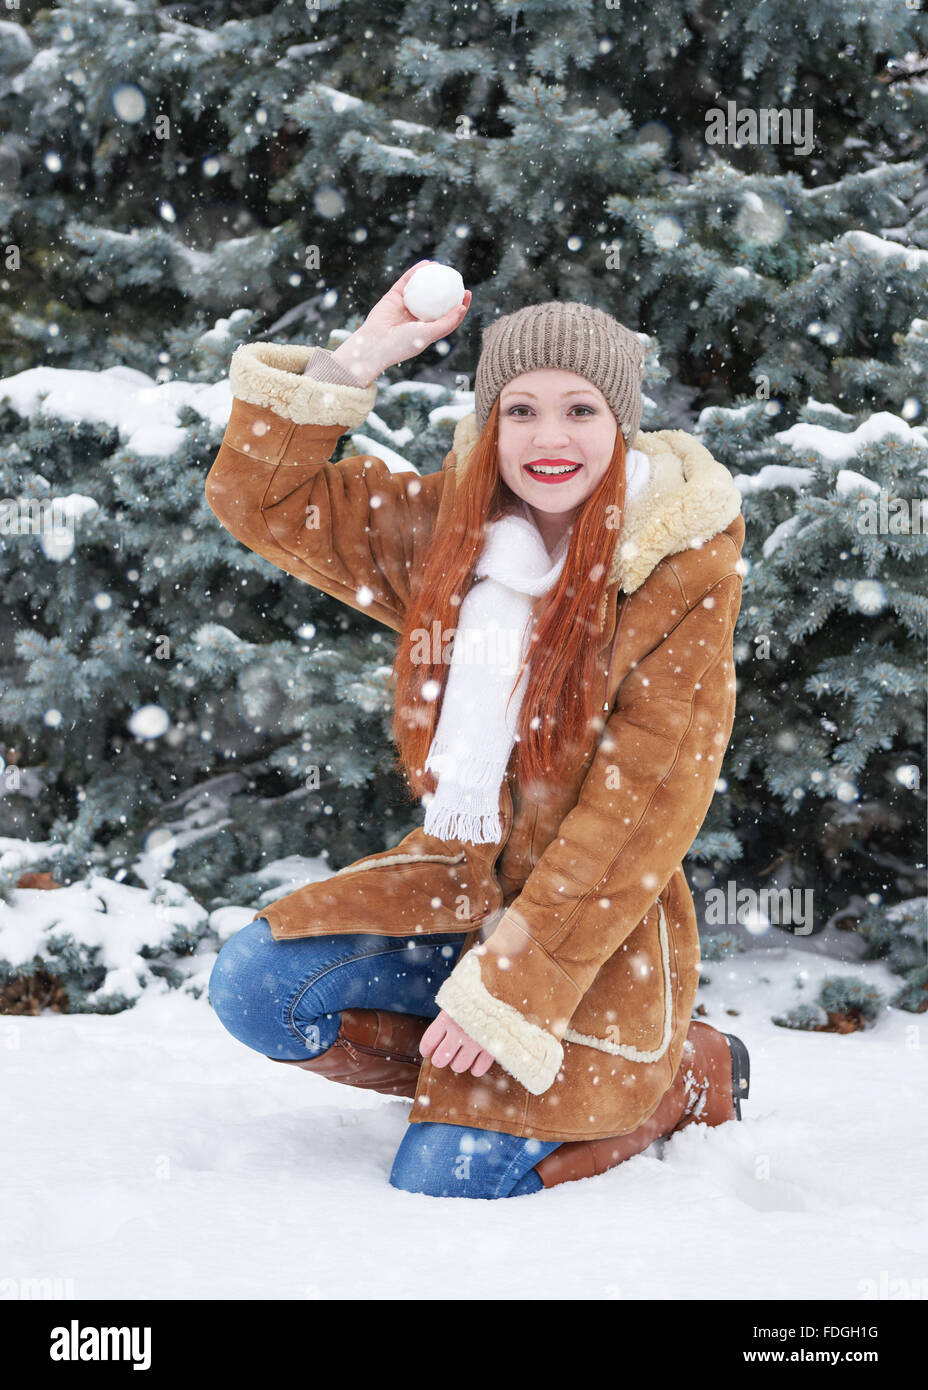 Girl play snowballs in winter park at day. Snowy fir trees. Redhead woman full length. Stock Photo